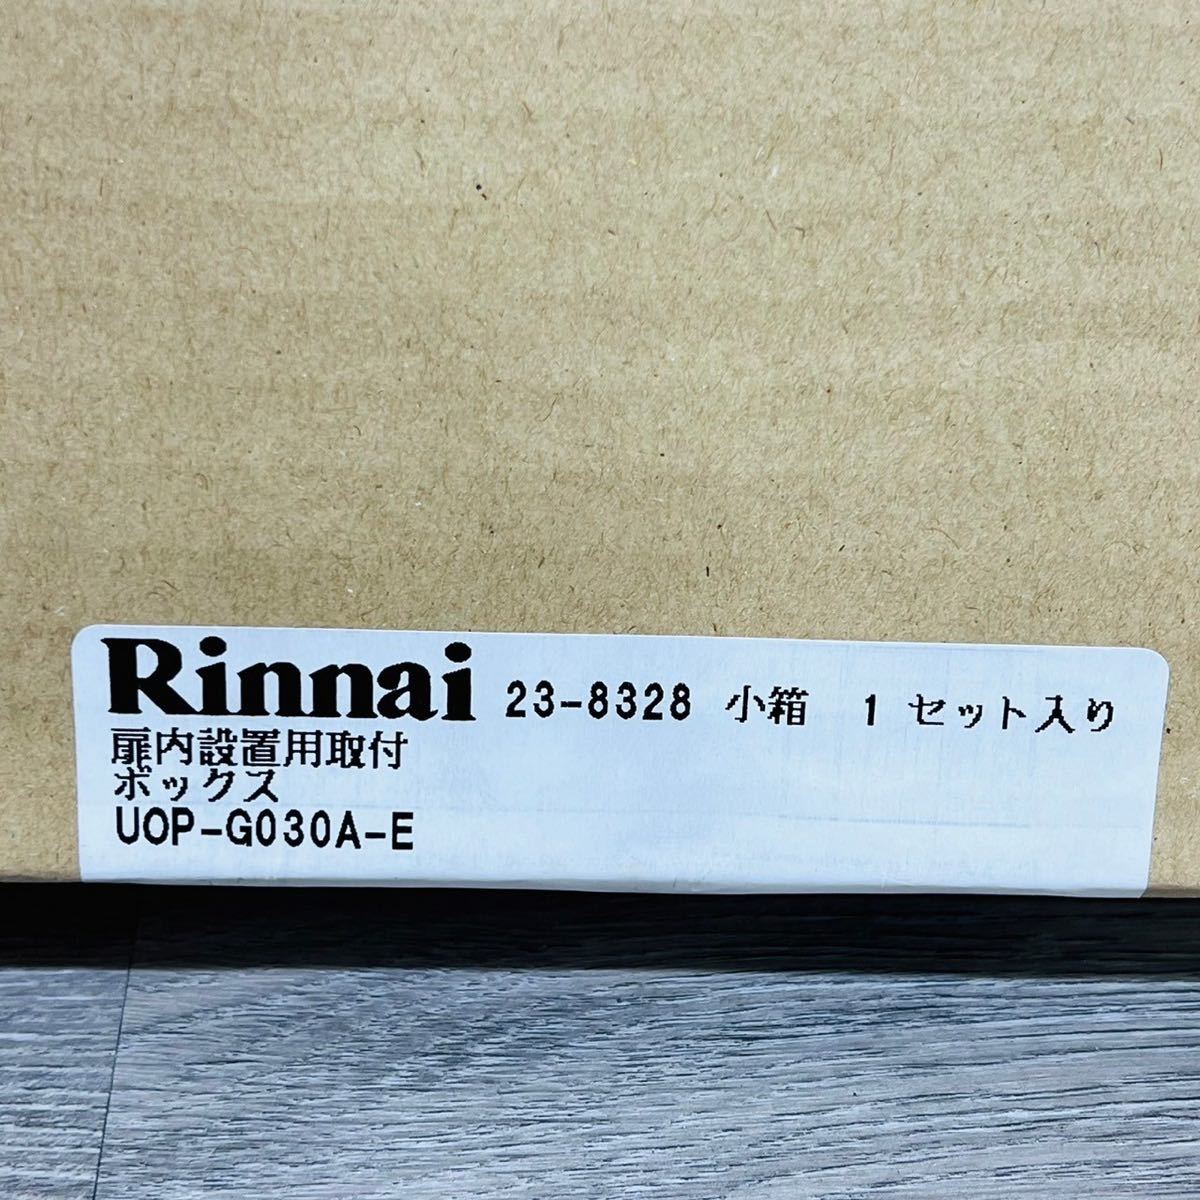 Rinnai a1928 gas water heater 20 number city gas 2023 year made 15